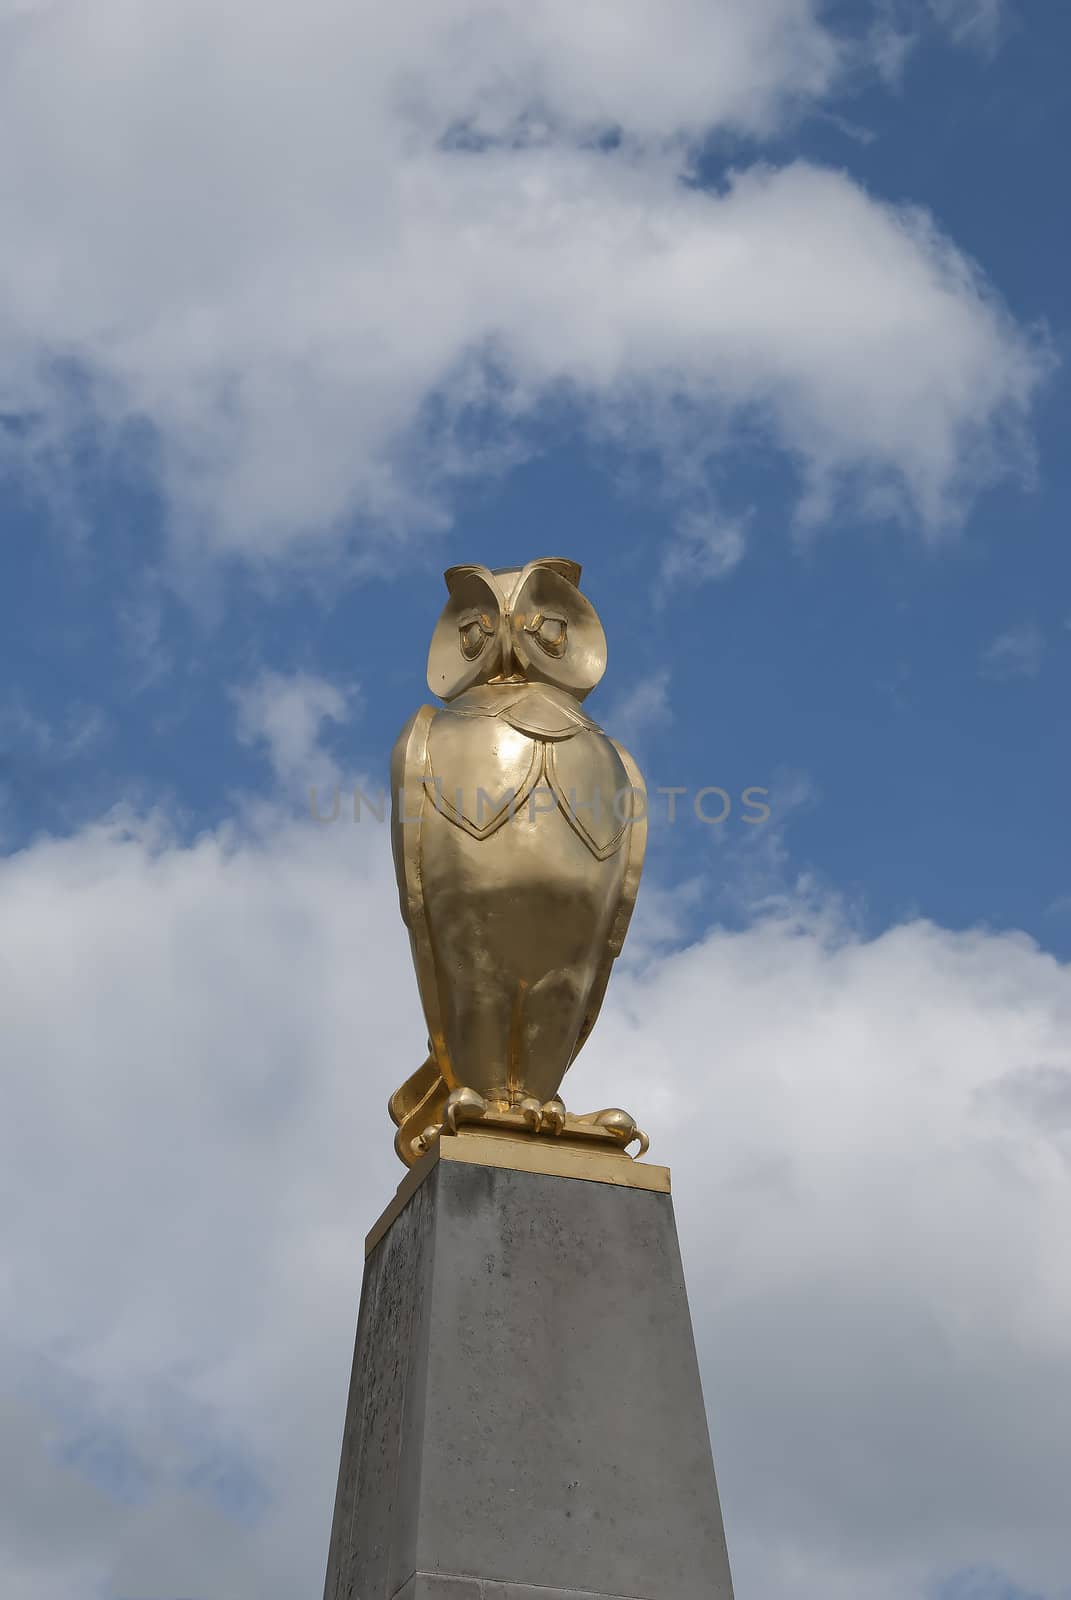 Gold Owl Statue by d40xboy